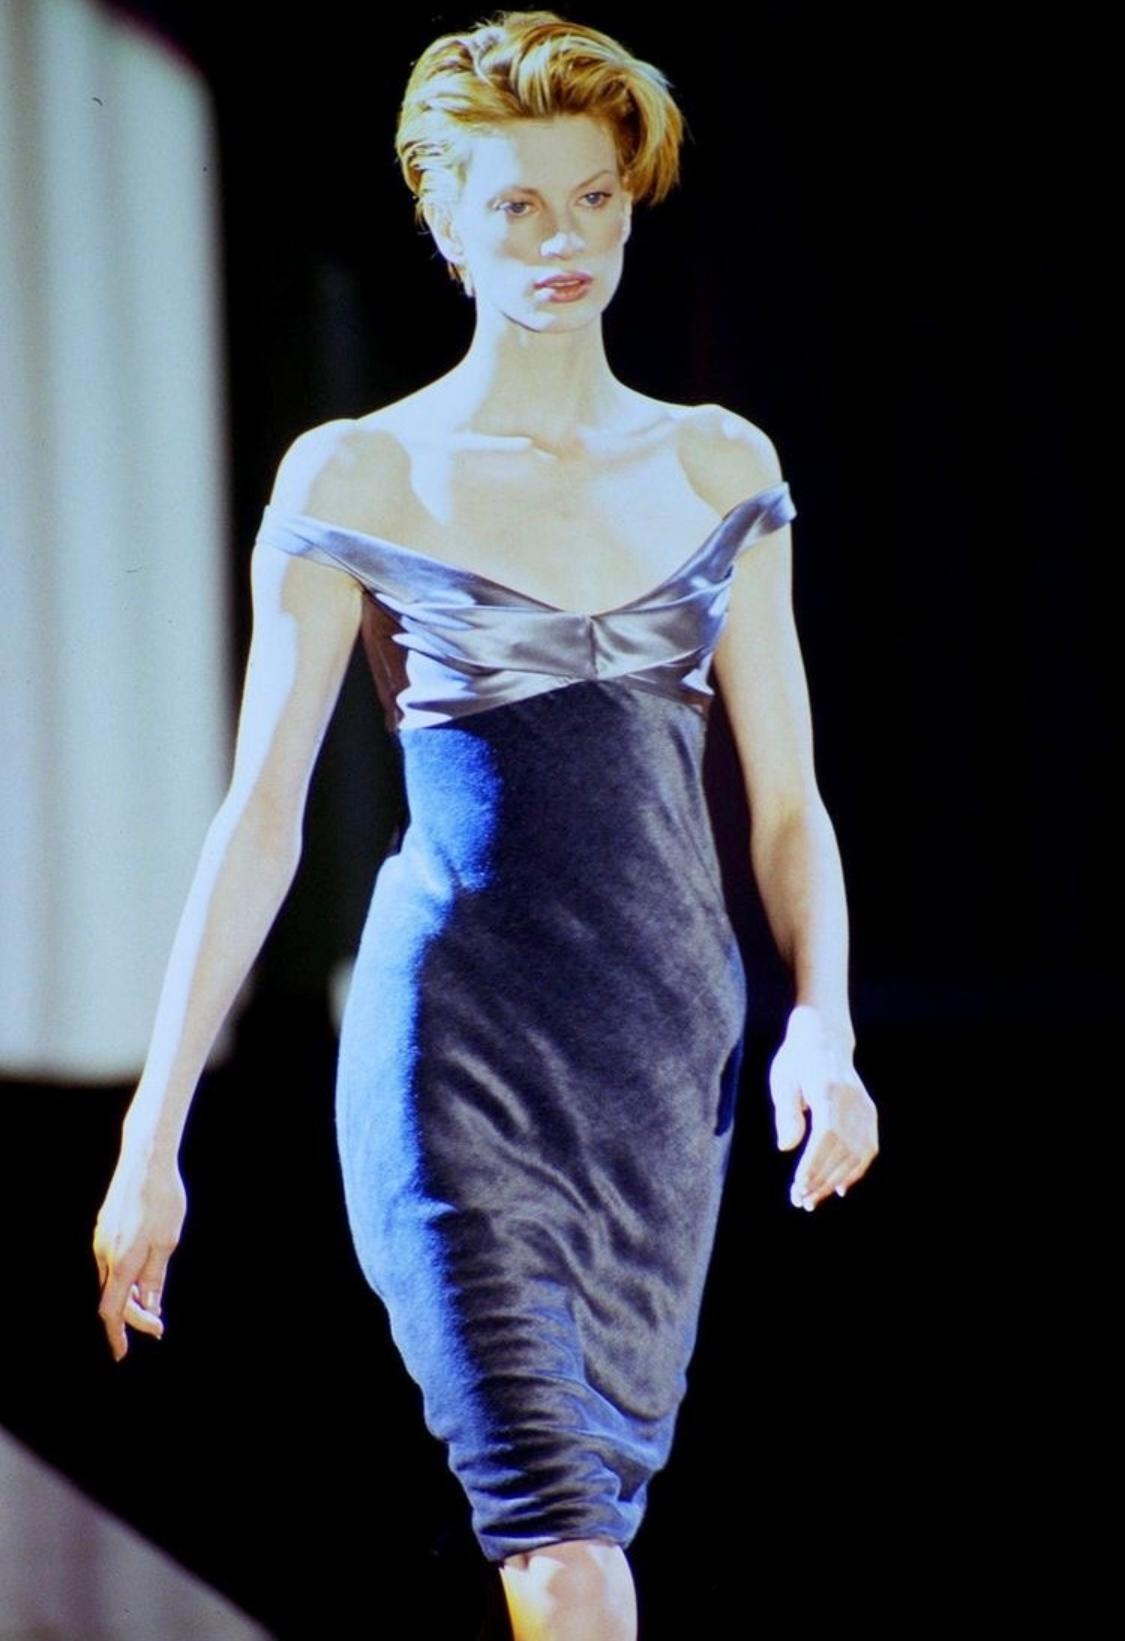 Presenting a lustrous satin and velvet Gianni Versace Couture dress, designed by Gianni Versace. From the Fall/Winter 1995 collection, the dress debuted on the season's runway as look number 56 on Kristen McMenamy. The dress is constructed of grey